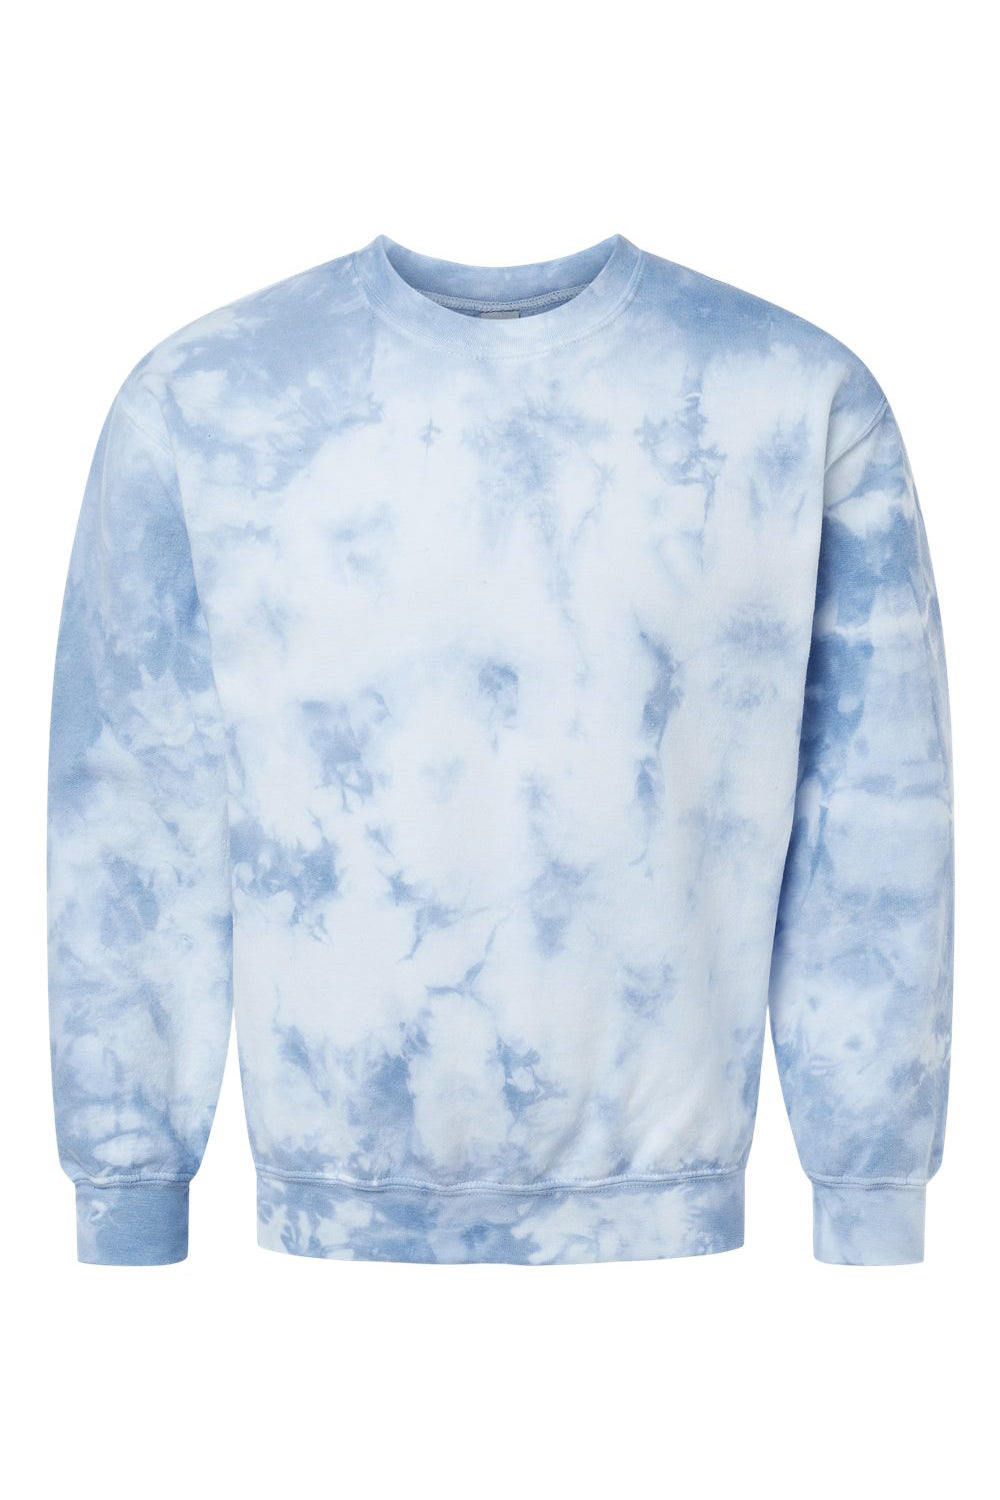 Dyenomite 681VR Mens Tie Dyed Crewneck Sweatshirt Cloudy Sky Crystal Flat Front